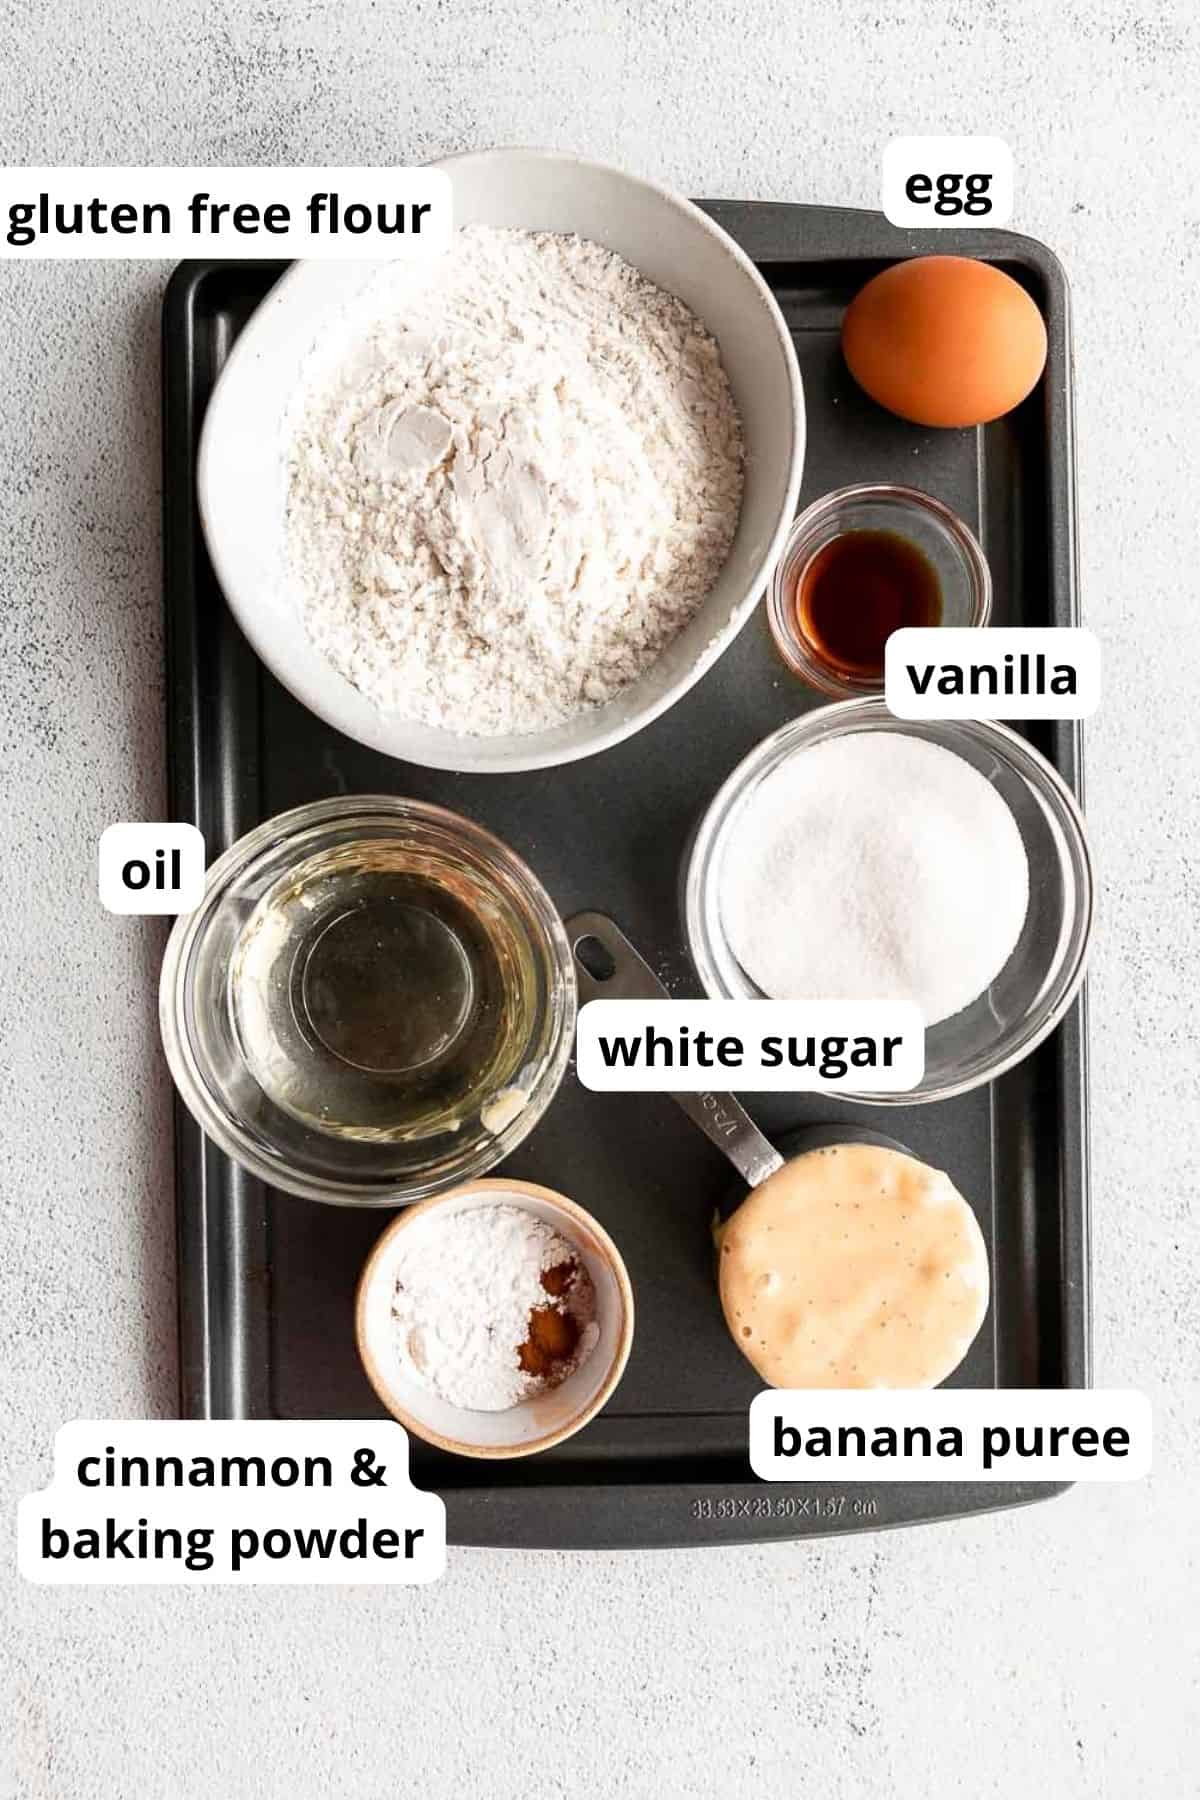 ingredients for the recipe in small bowls with labels